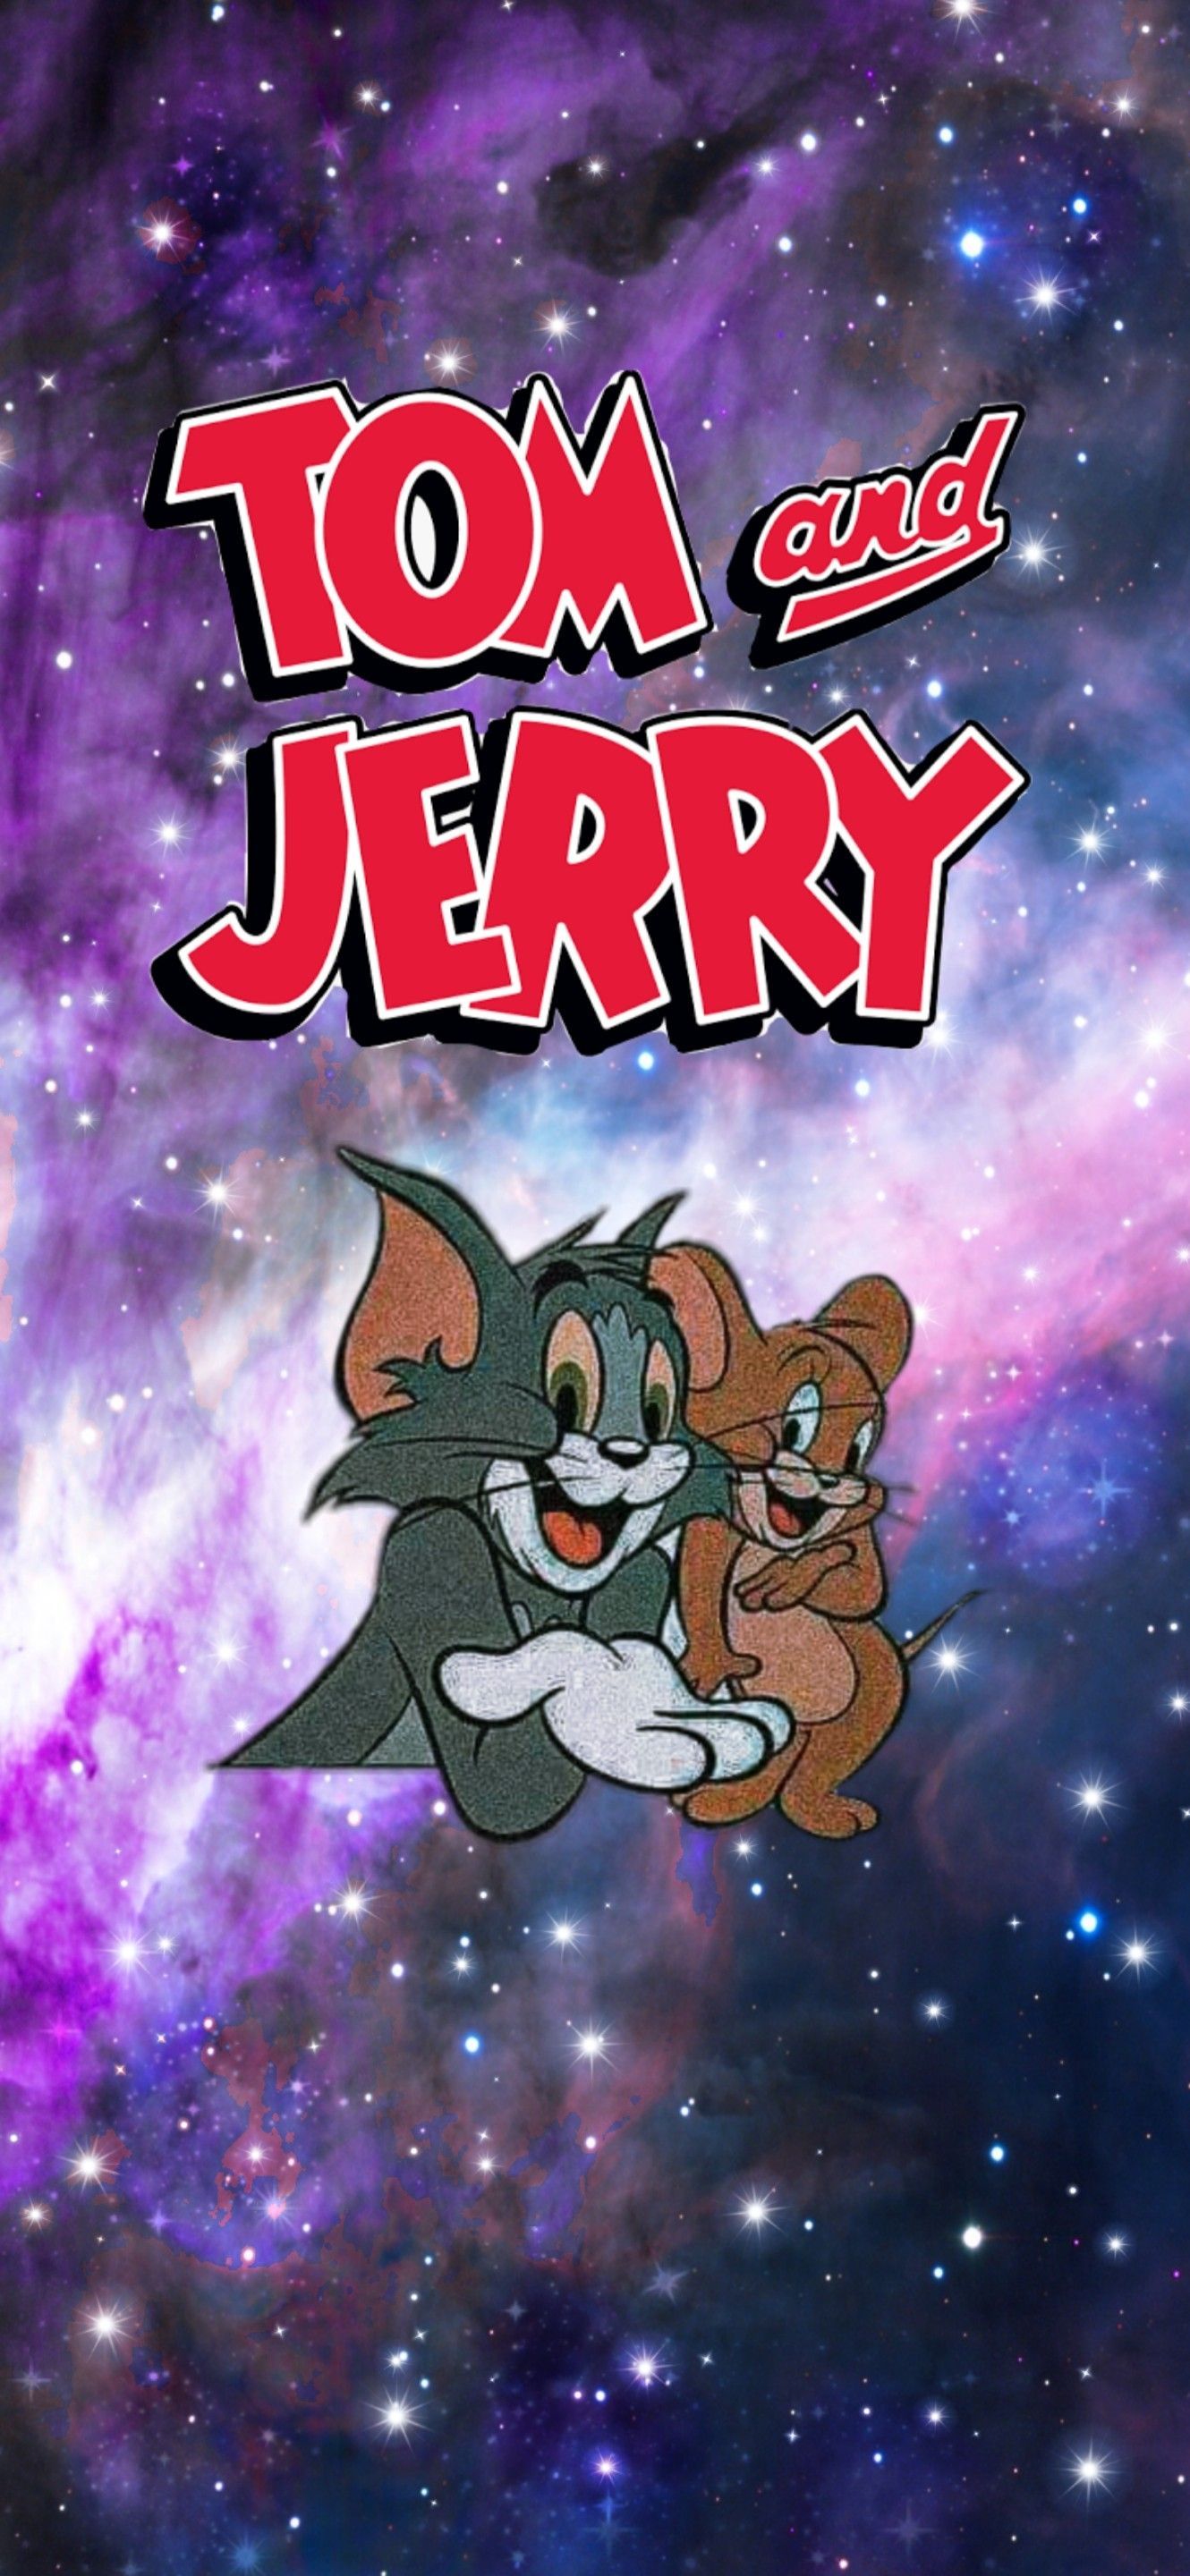 Tom and Jerry aesthetic phone wallpaper